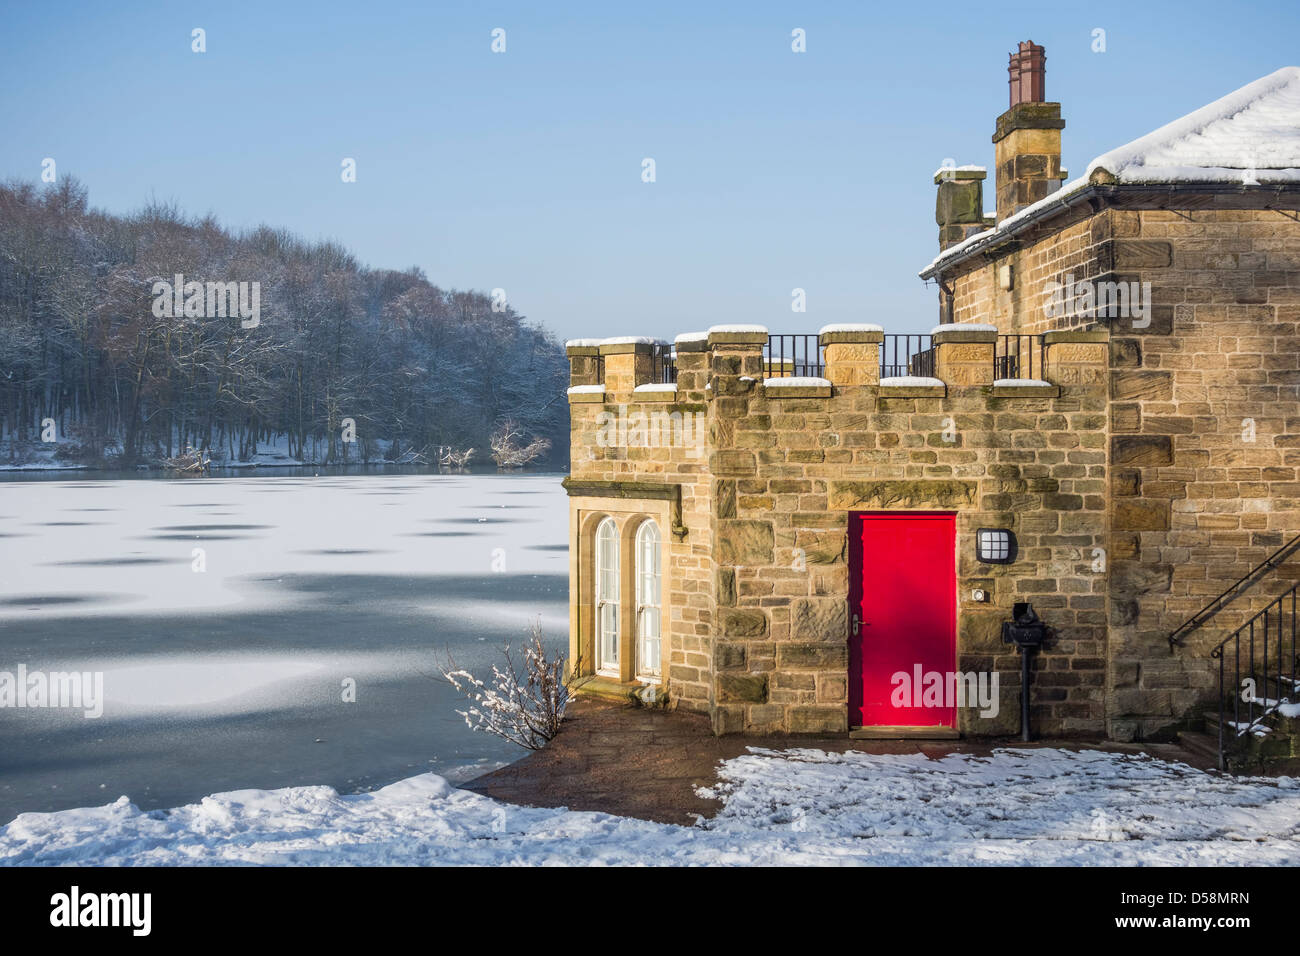 Inverno a Newmiller diga Vicino a Wakefield, West Yorkshire. Foto Stock